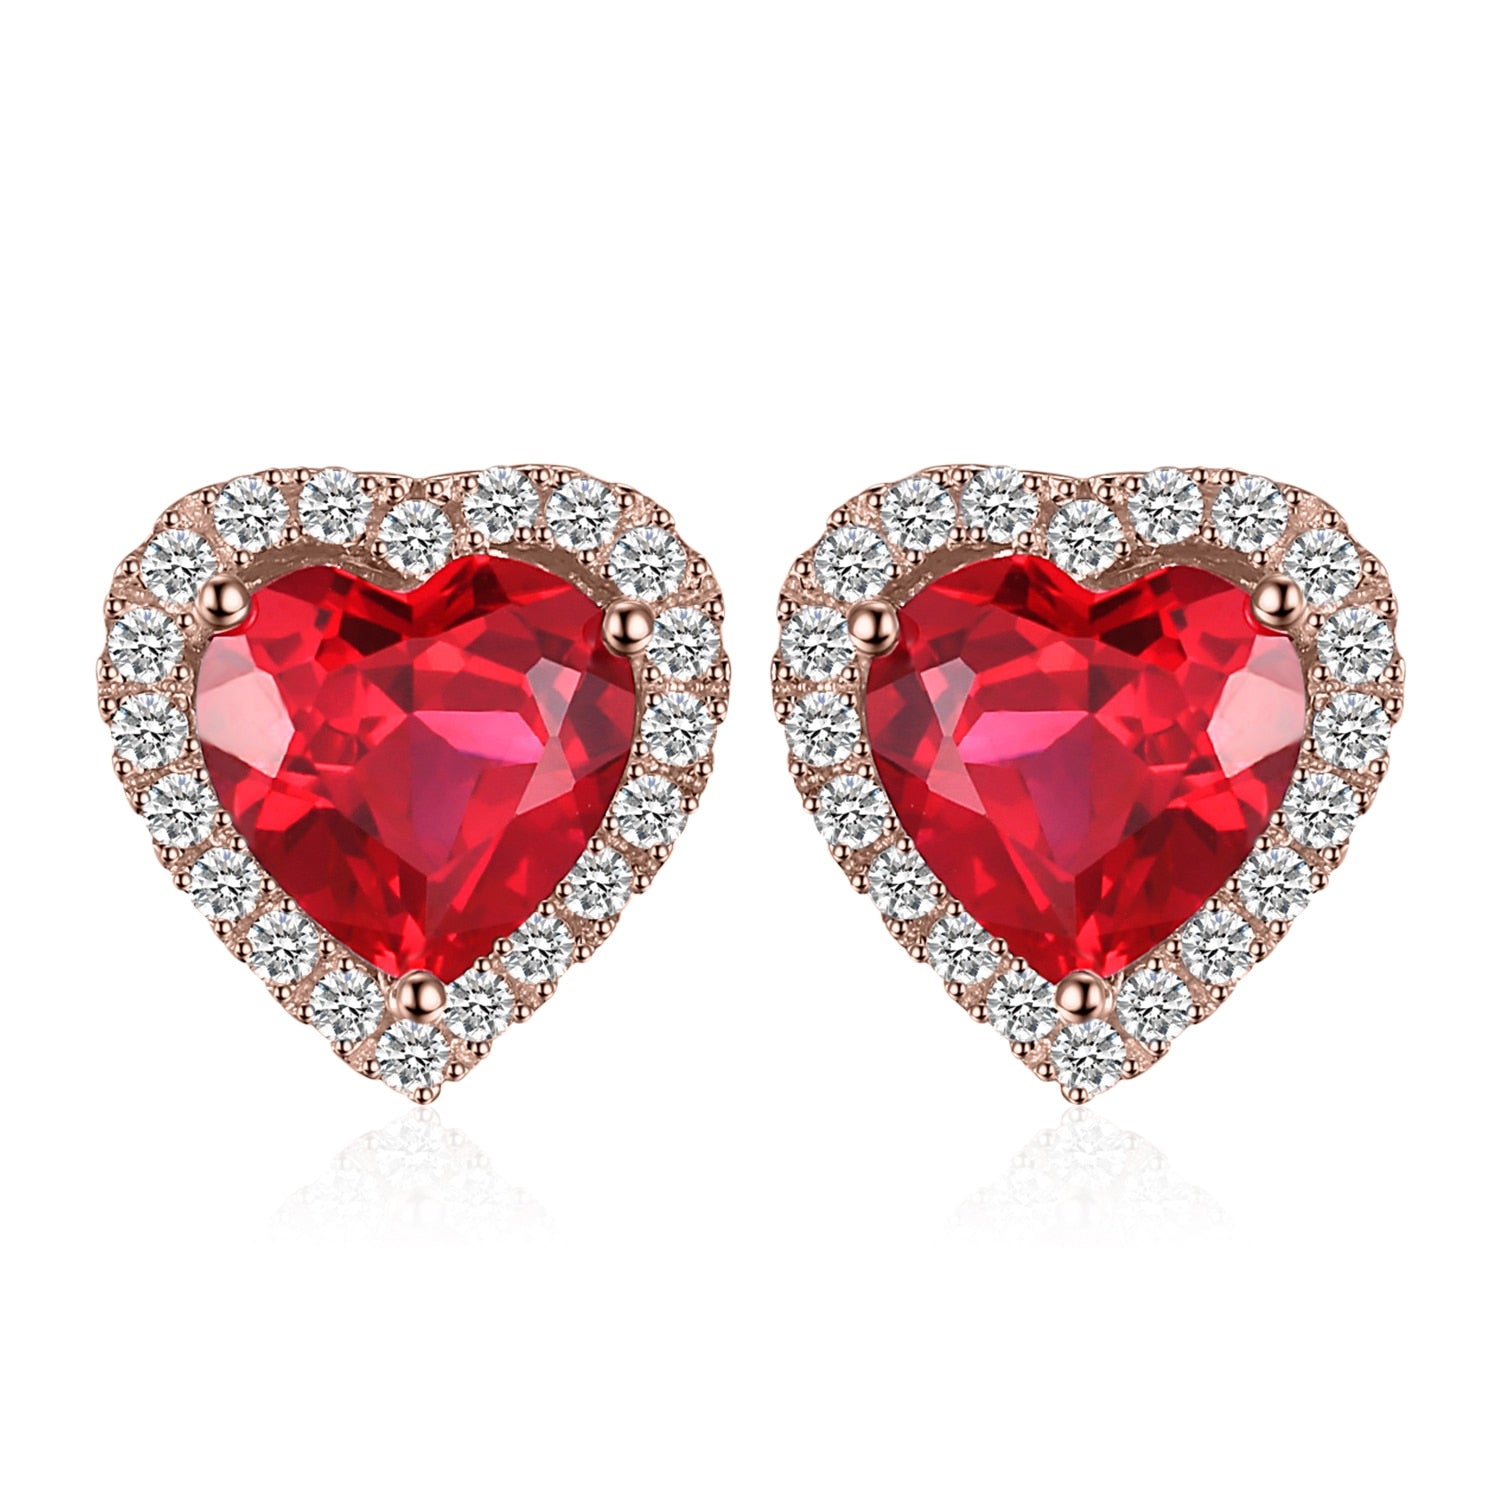 JewelryPalace Heart Created Ruby 925 Sterling Silver Stud Earrings For Women Gemstone Fine Jewelry Yellow Gold Rose Gold Plated